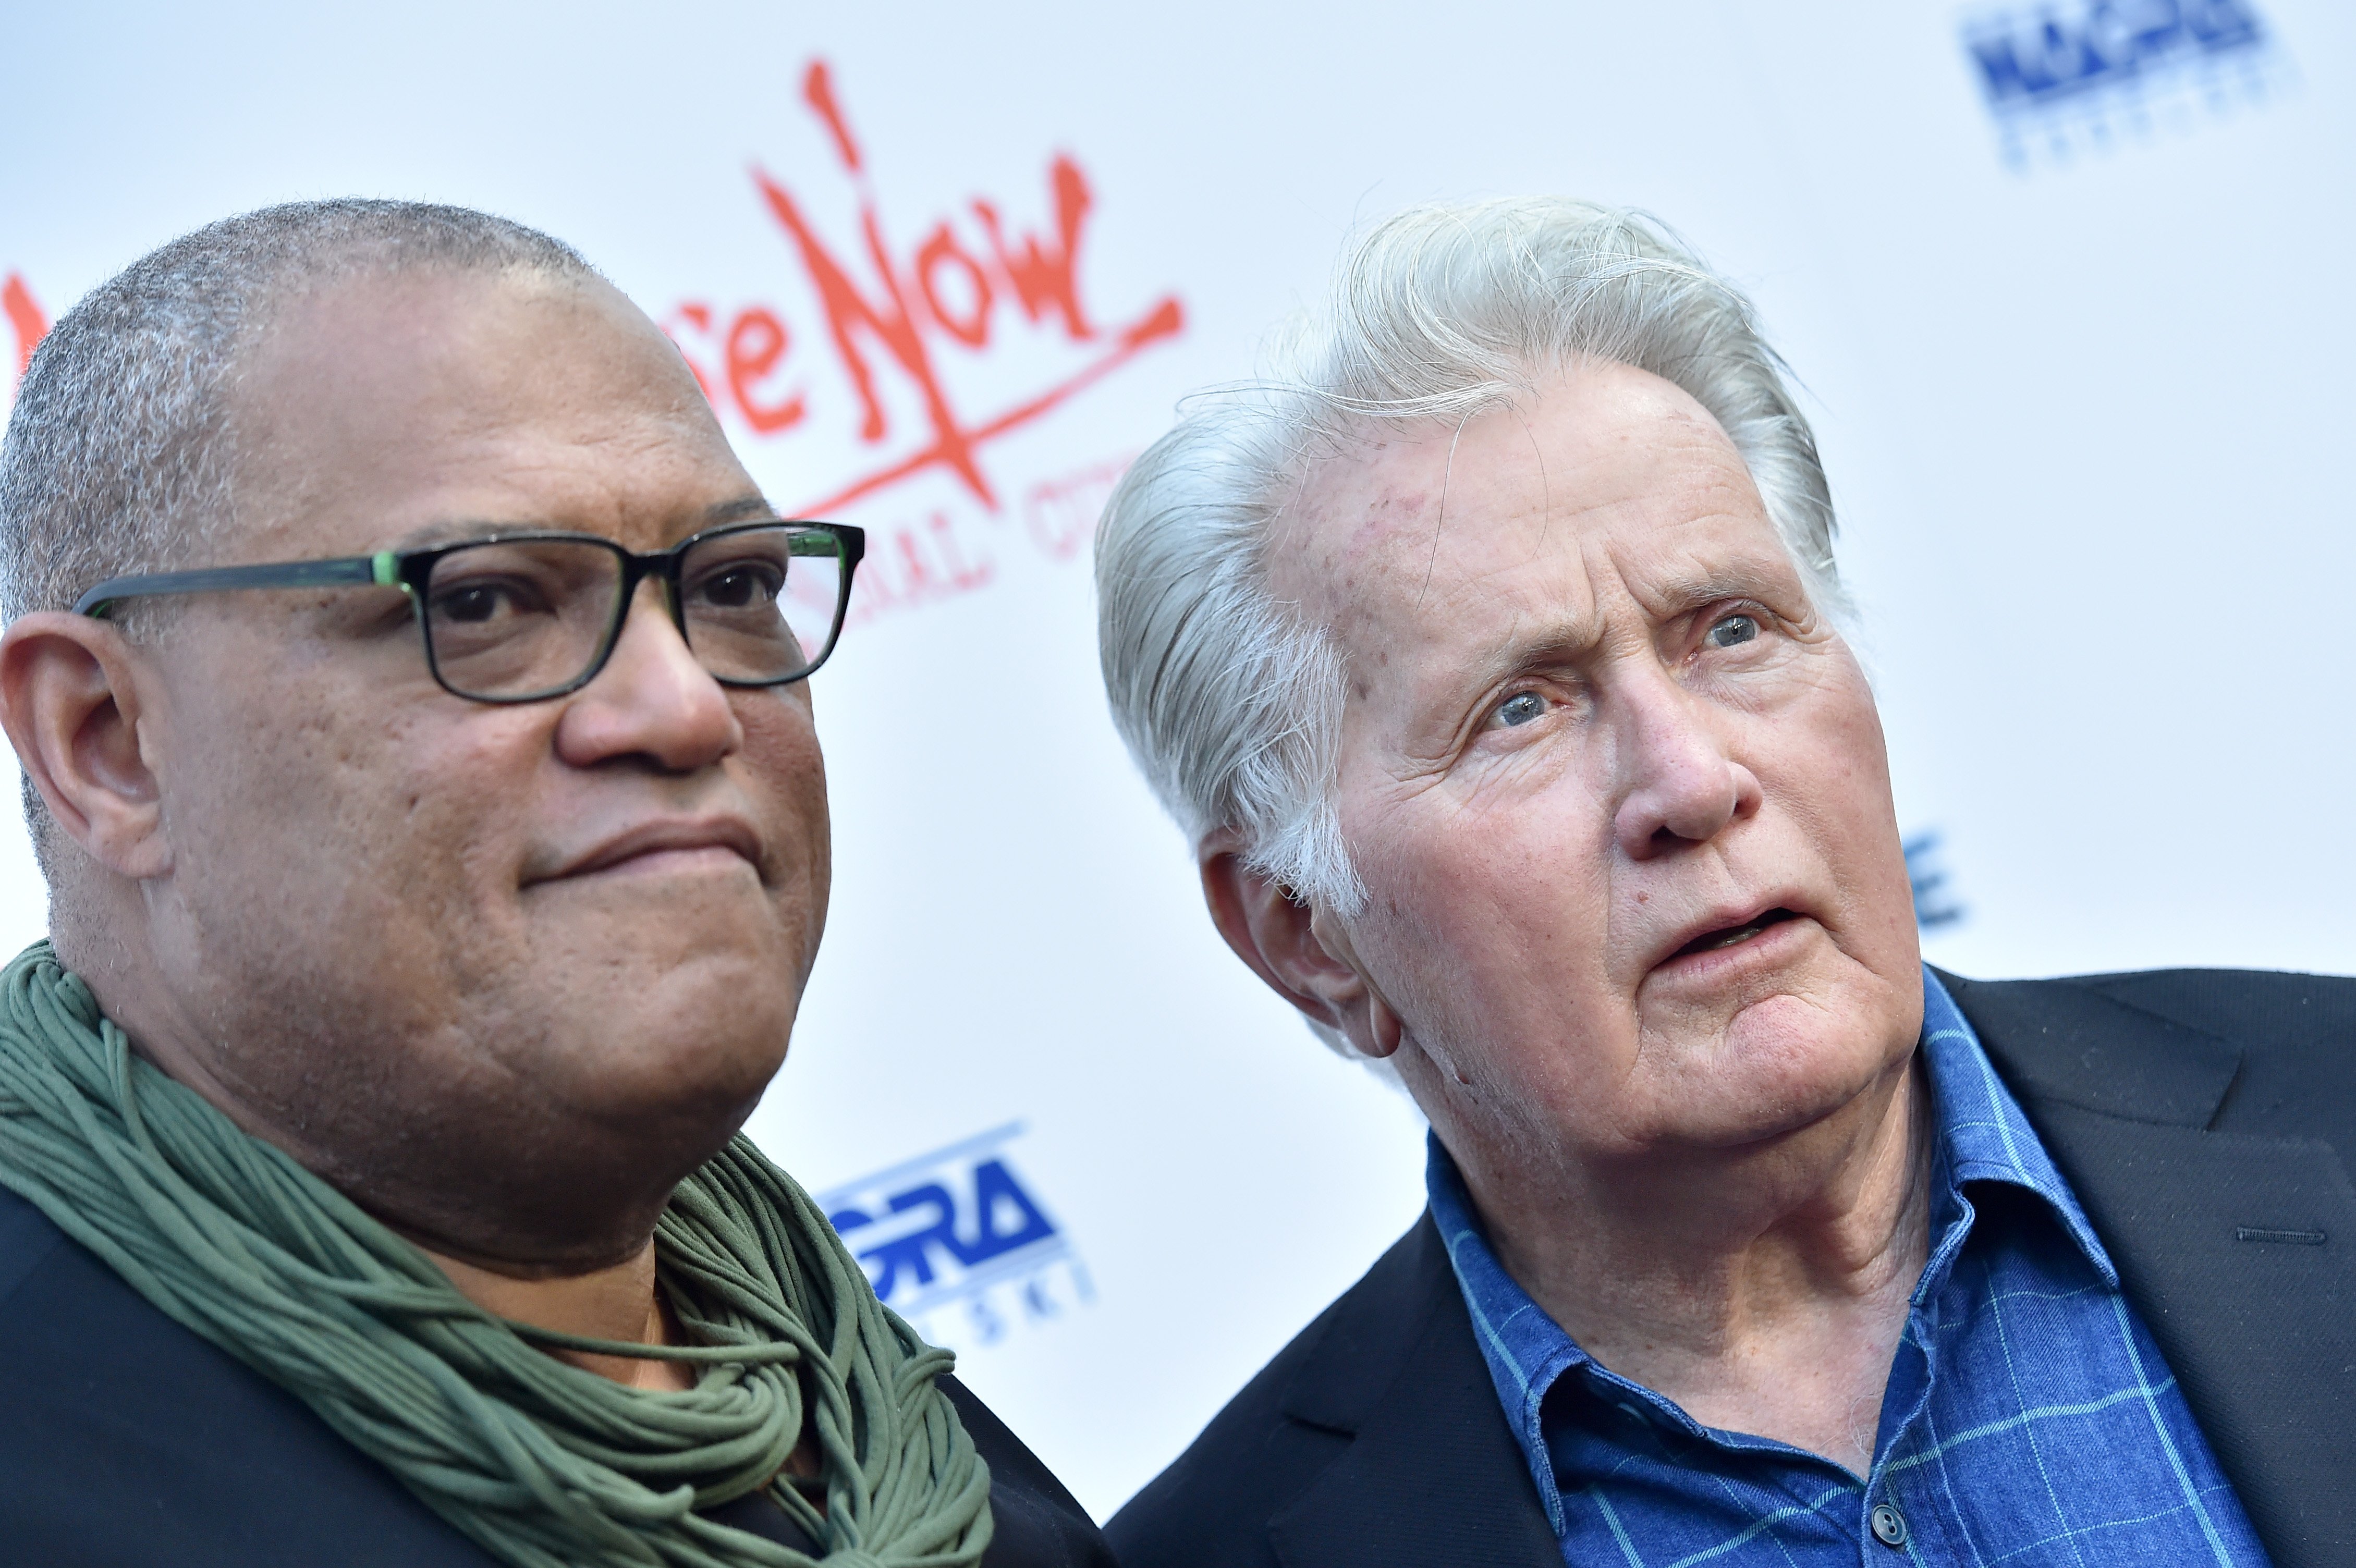 Martin Sheen and Laurence Fishburne in California 2019. | Source: Getty Images 